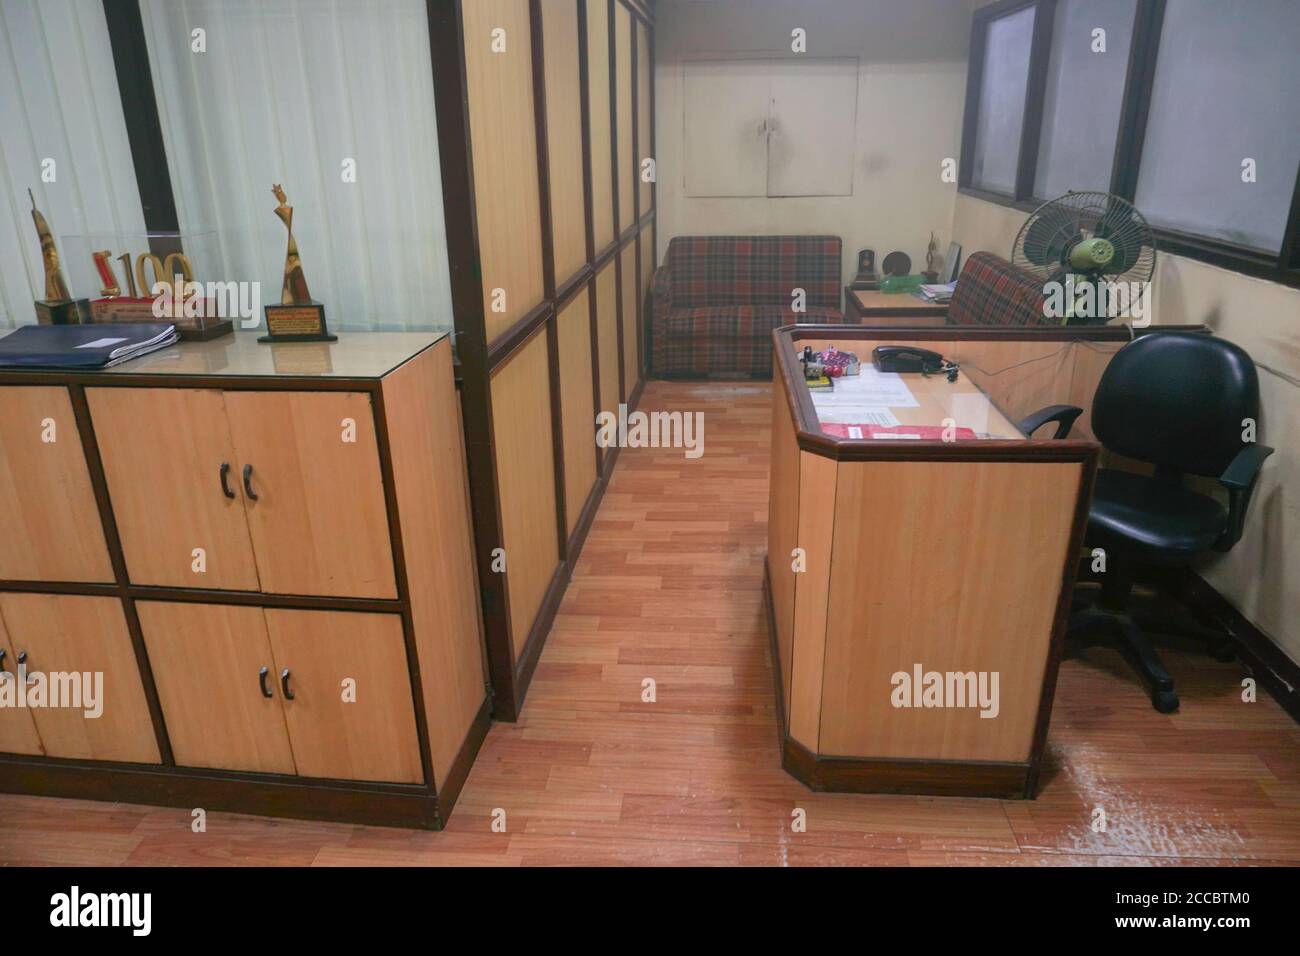 Kolkata, West Bengal, India - 21st June 2020 : An Office space after sanitization spray used, sanitizing smoke filled the air. Sanitized room. Stock Photo